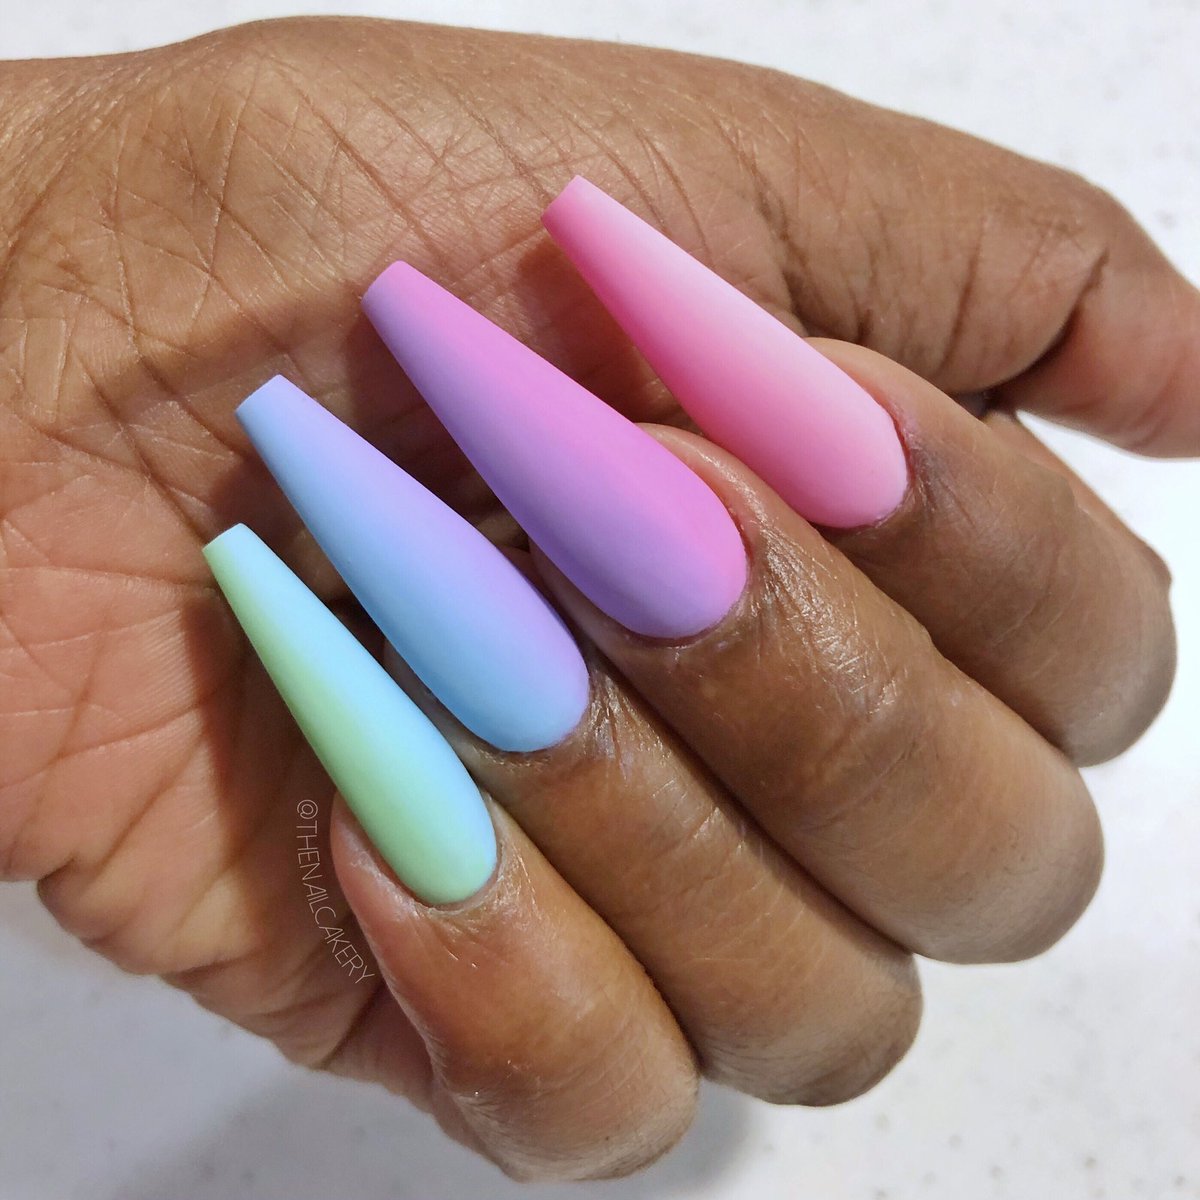 Ballerina nails 2 75+ Hottest Looking Nail Shapes for Women - 58